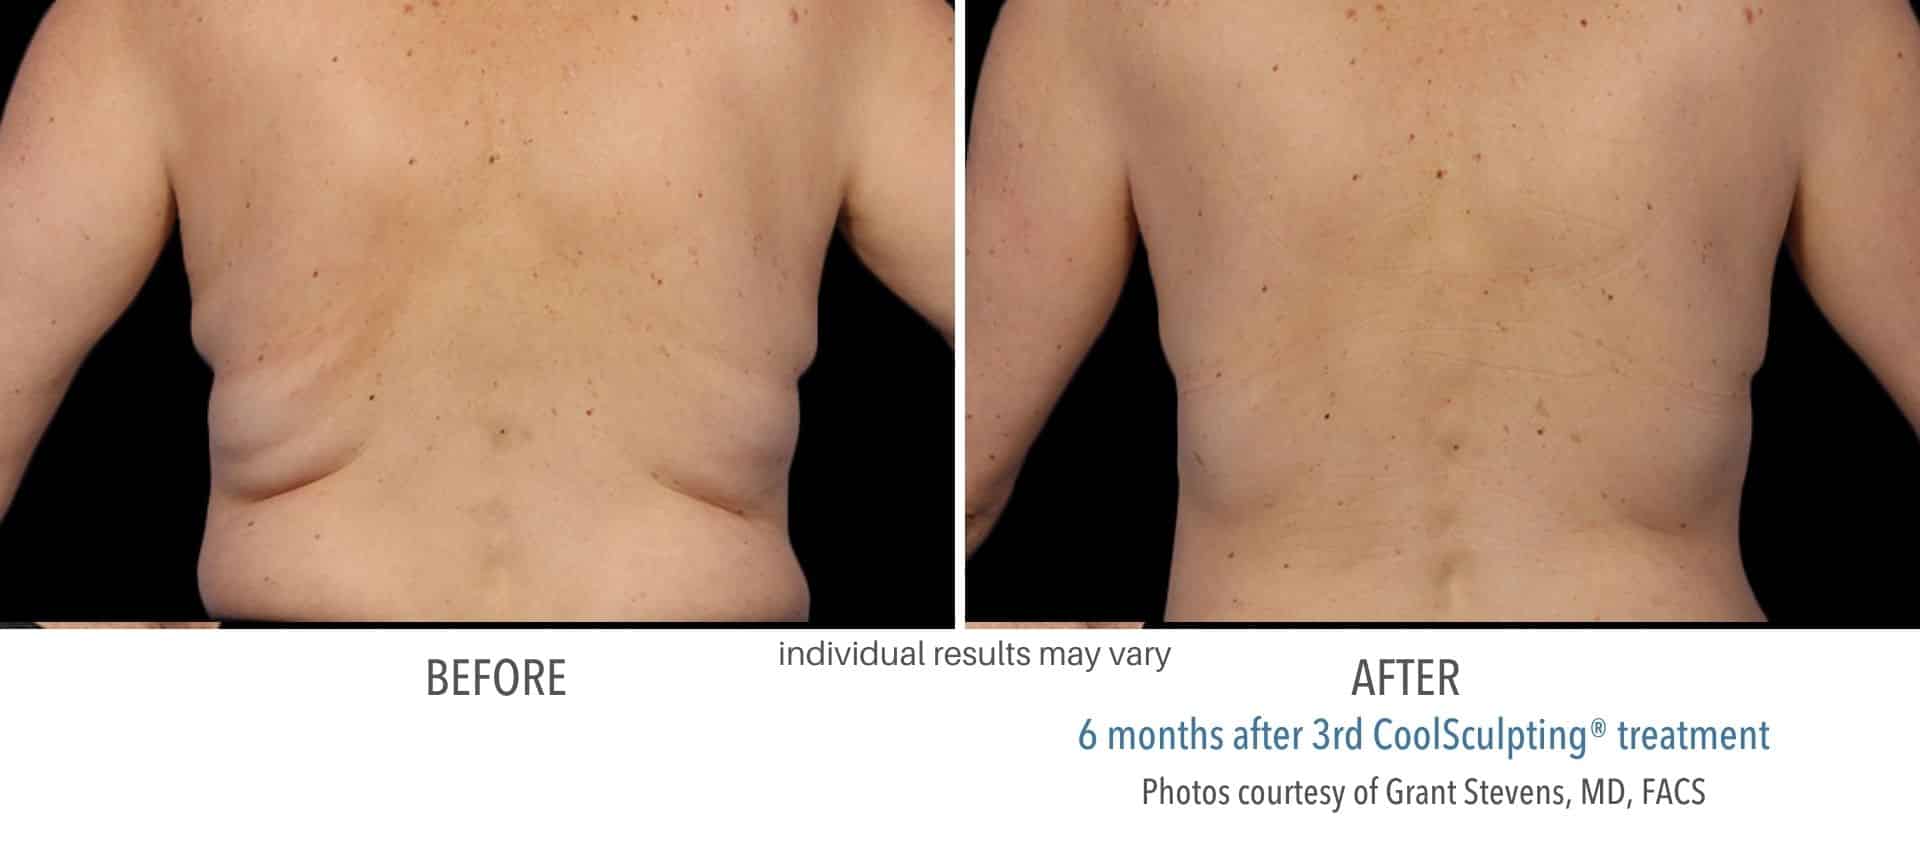 coolsculpting treatment back fat for male in Los Angeles